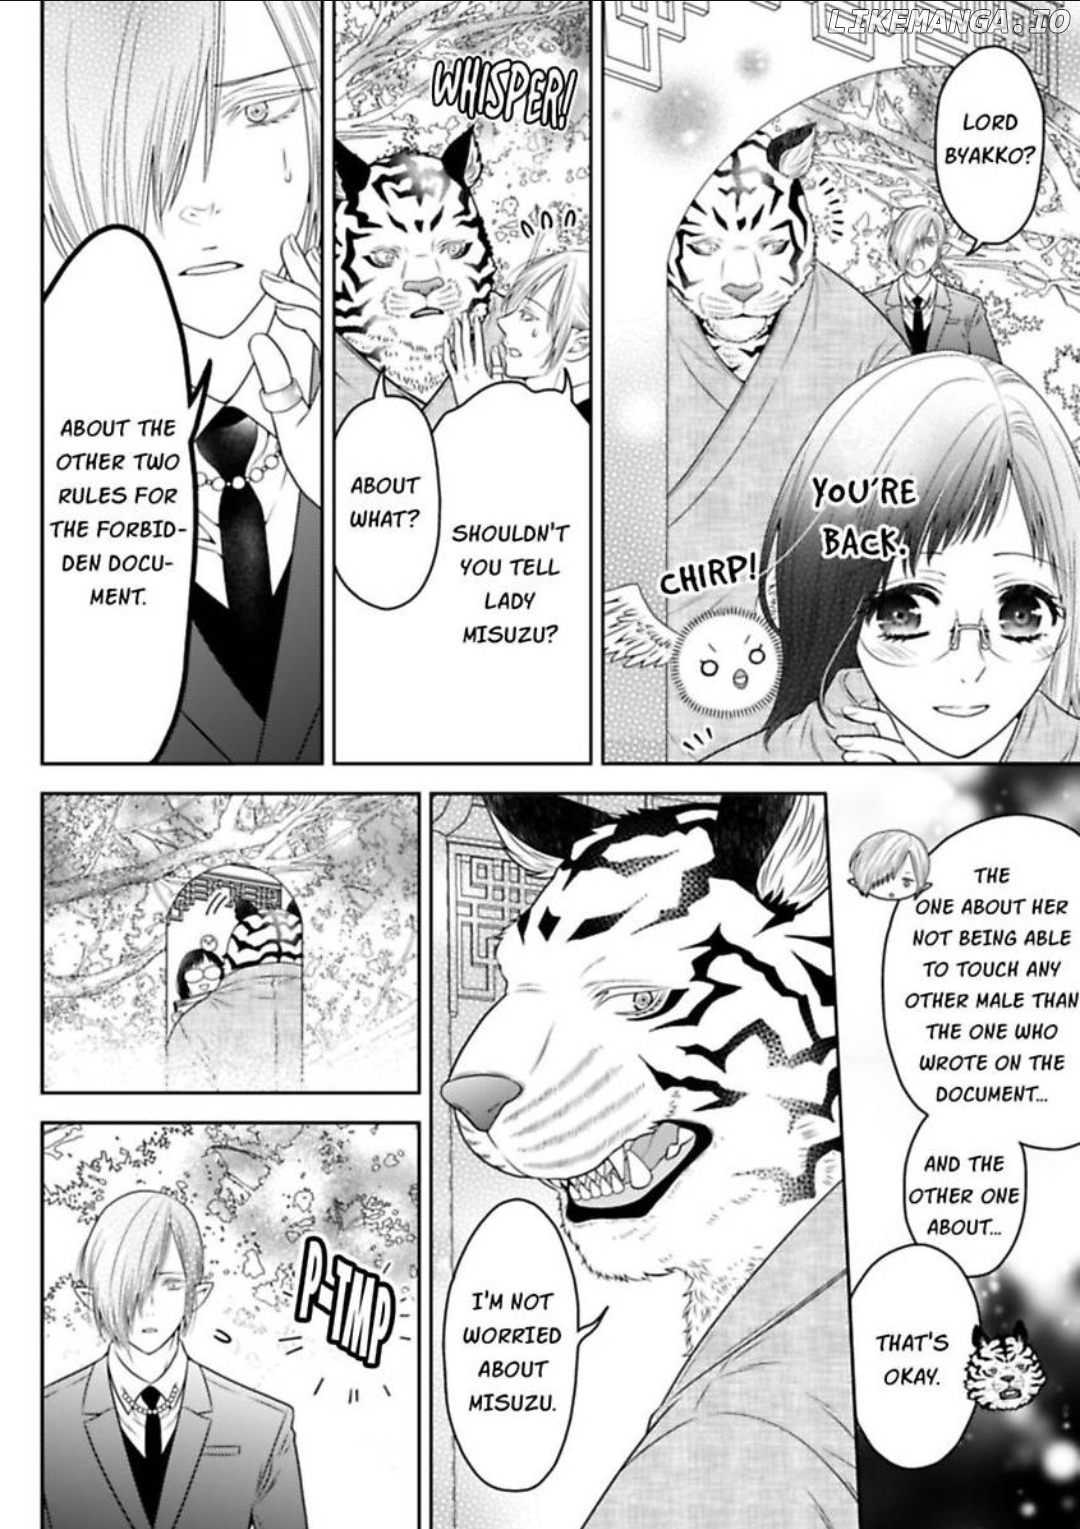 The White Tiger Loves Me to Death: A Fluffy Yet Passionate Love Story Chapter 7 - page 17